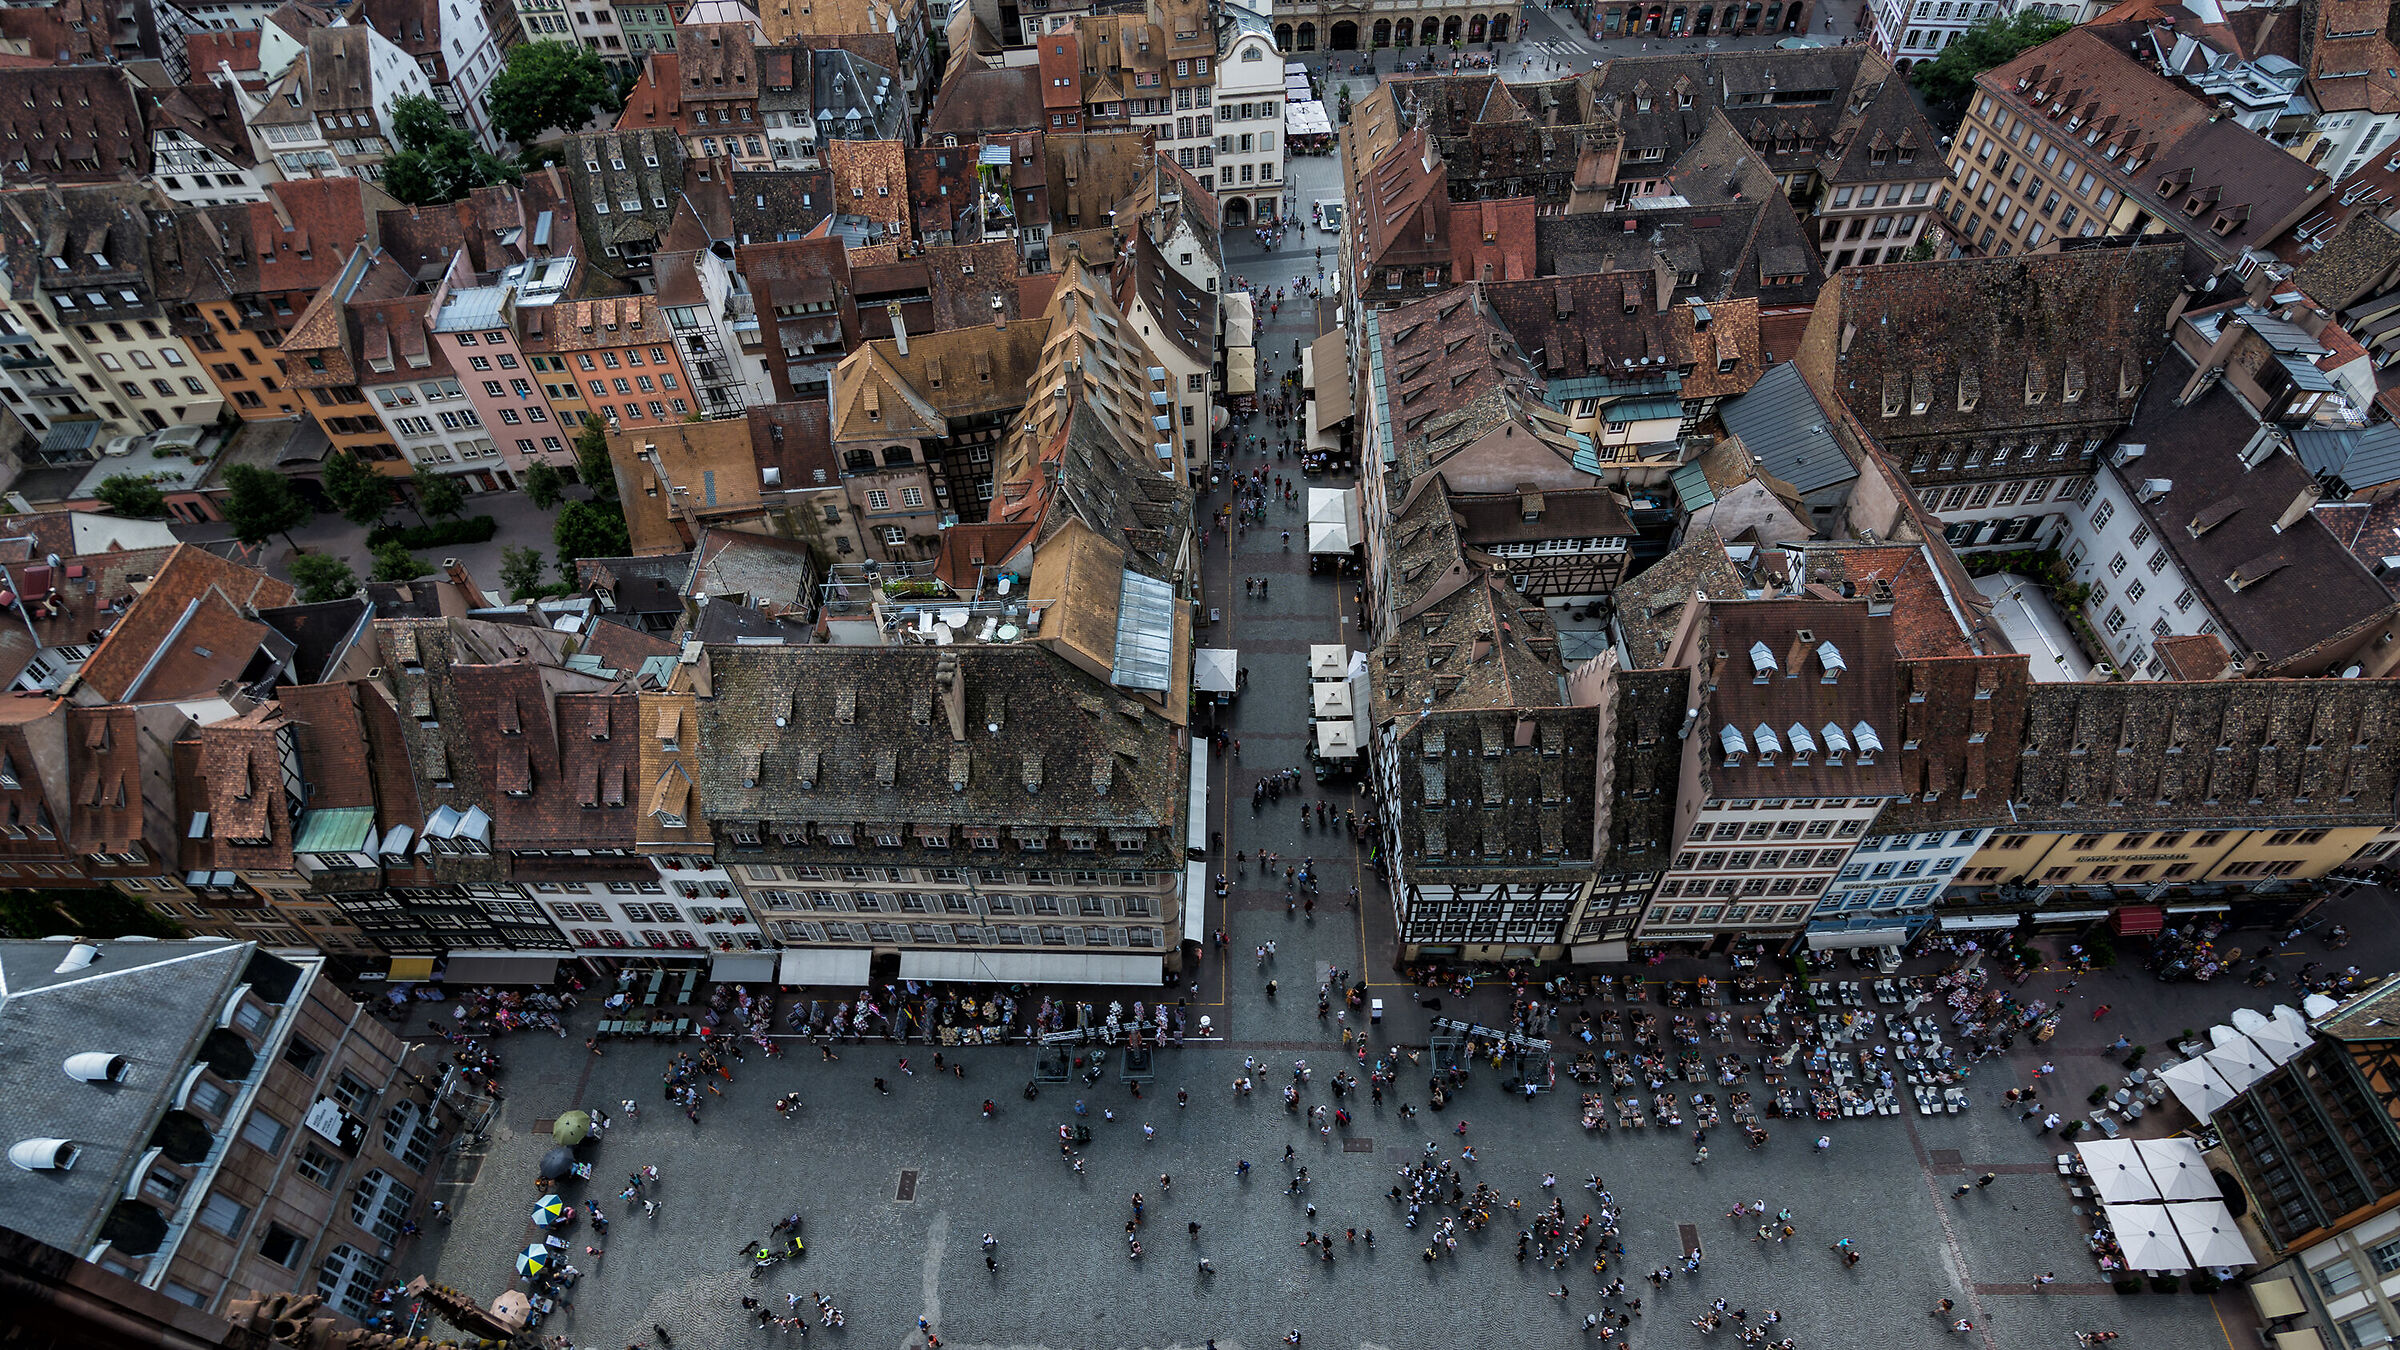 Strasbourg from above...